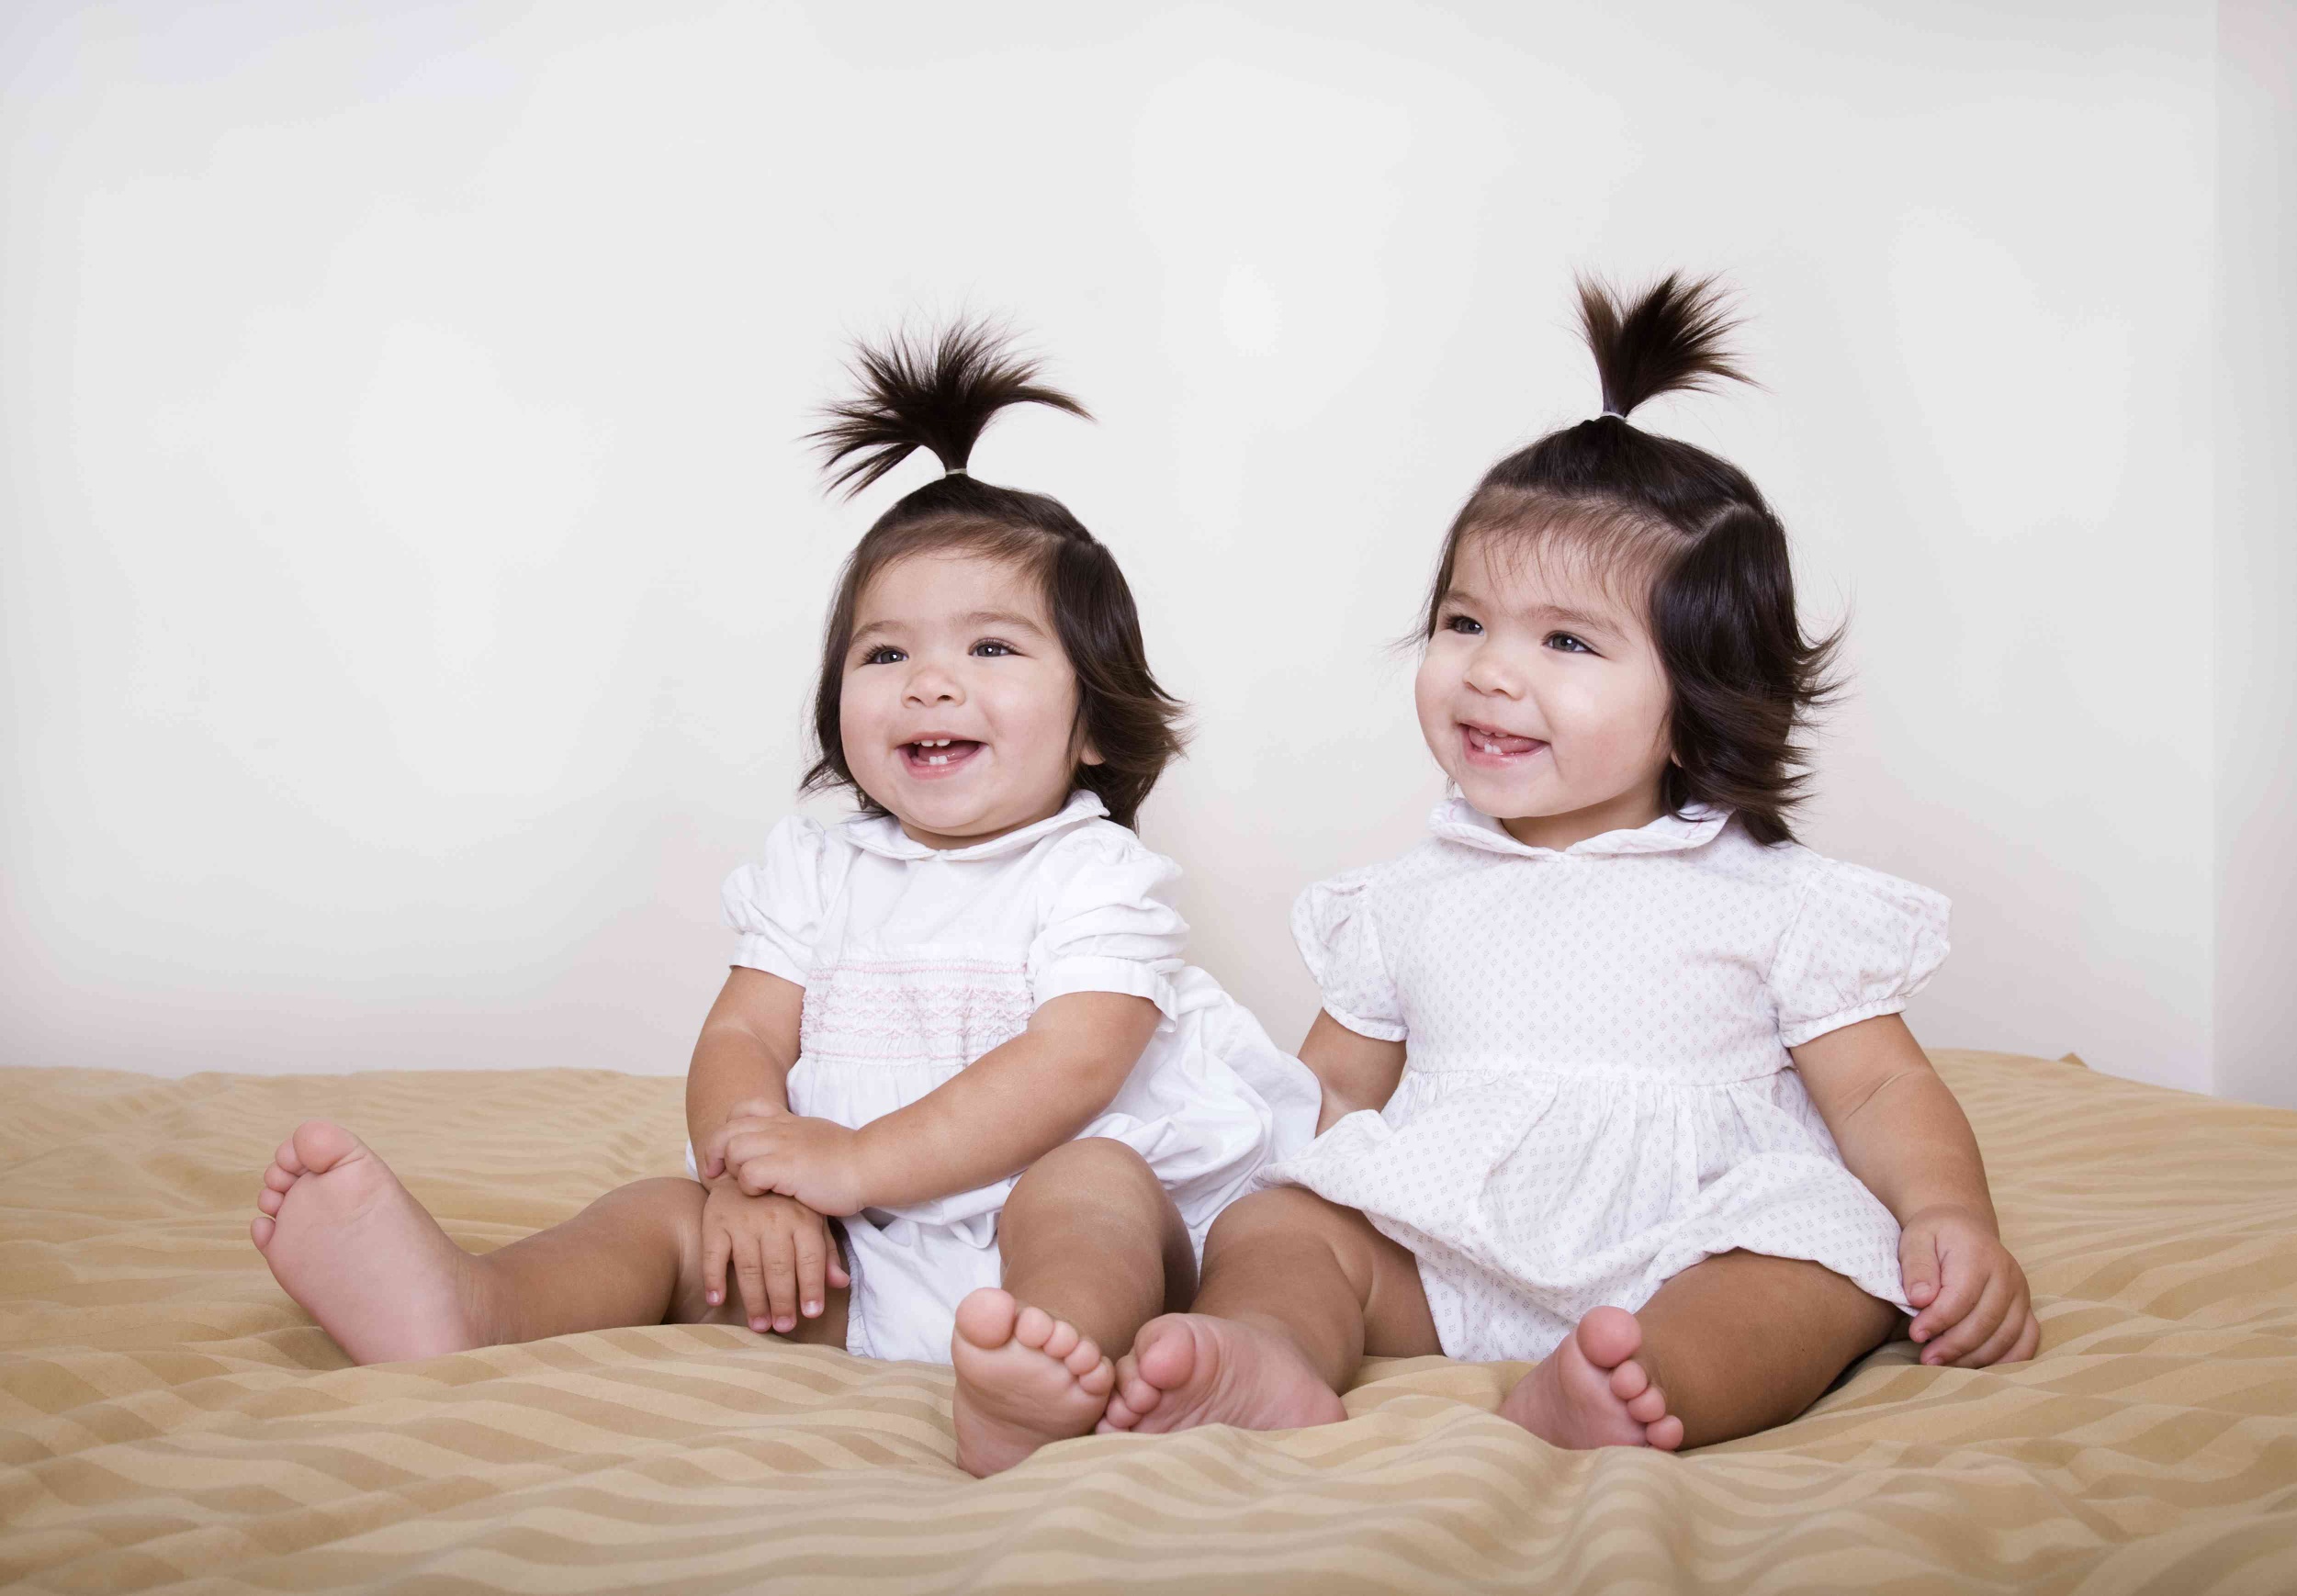 Photo: Identical twin babies